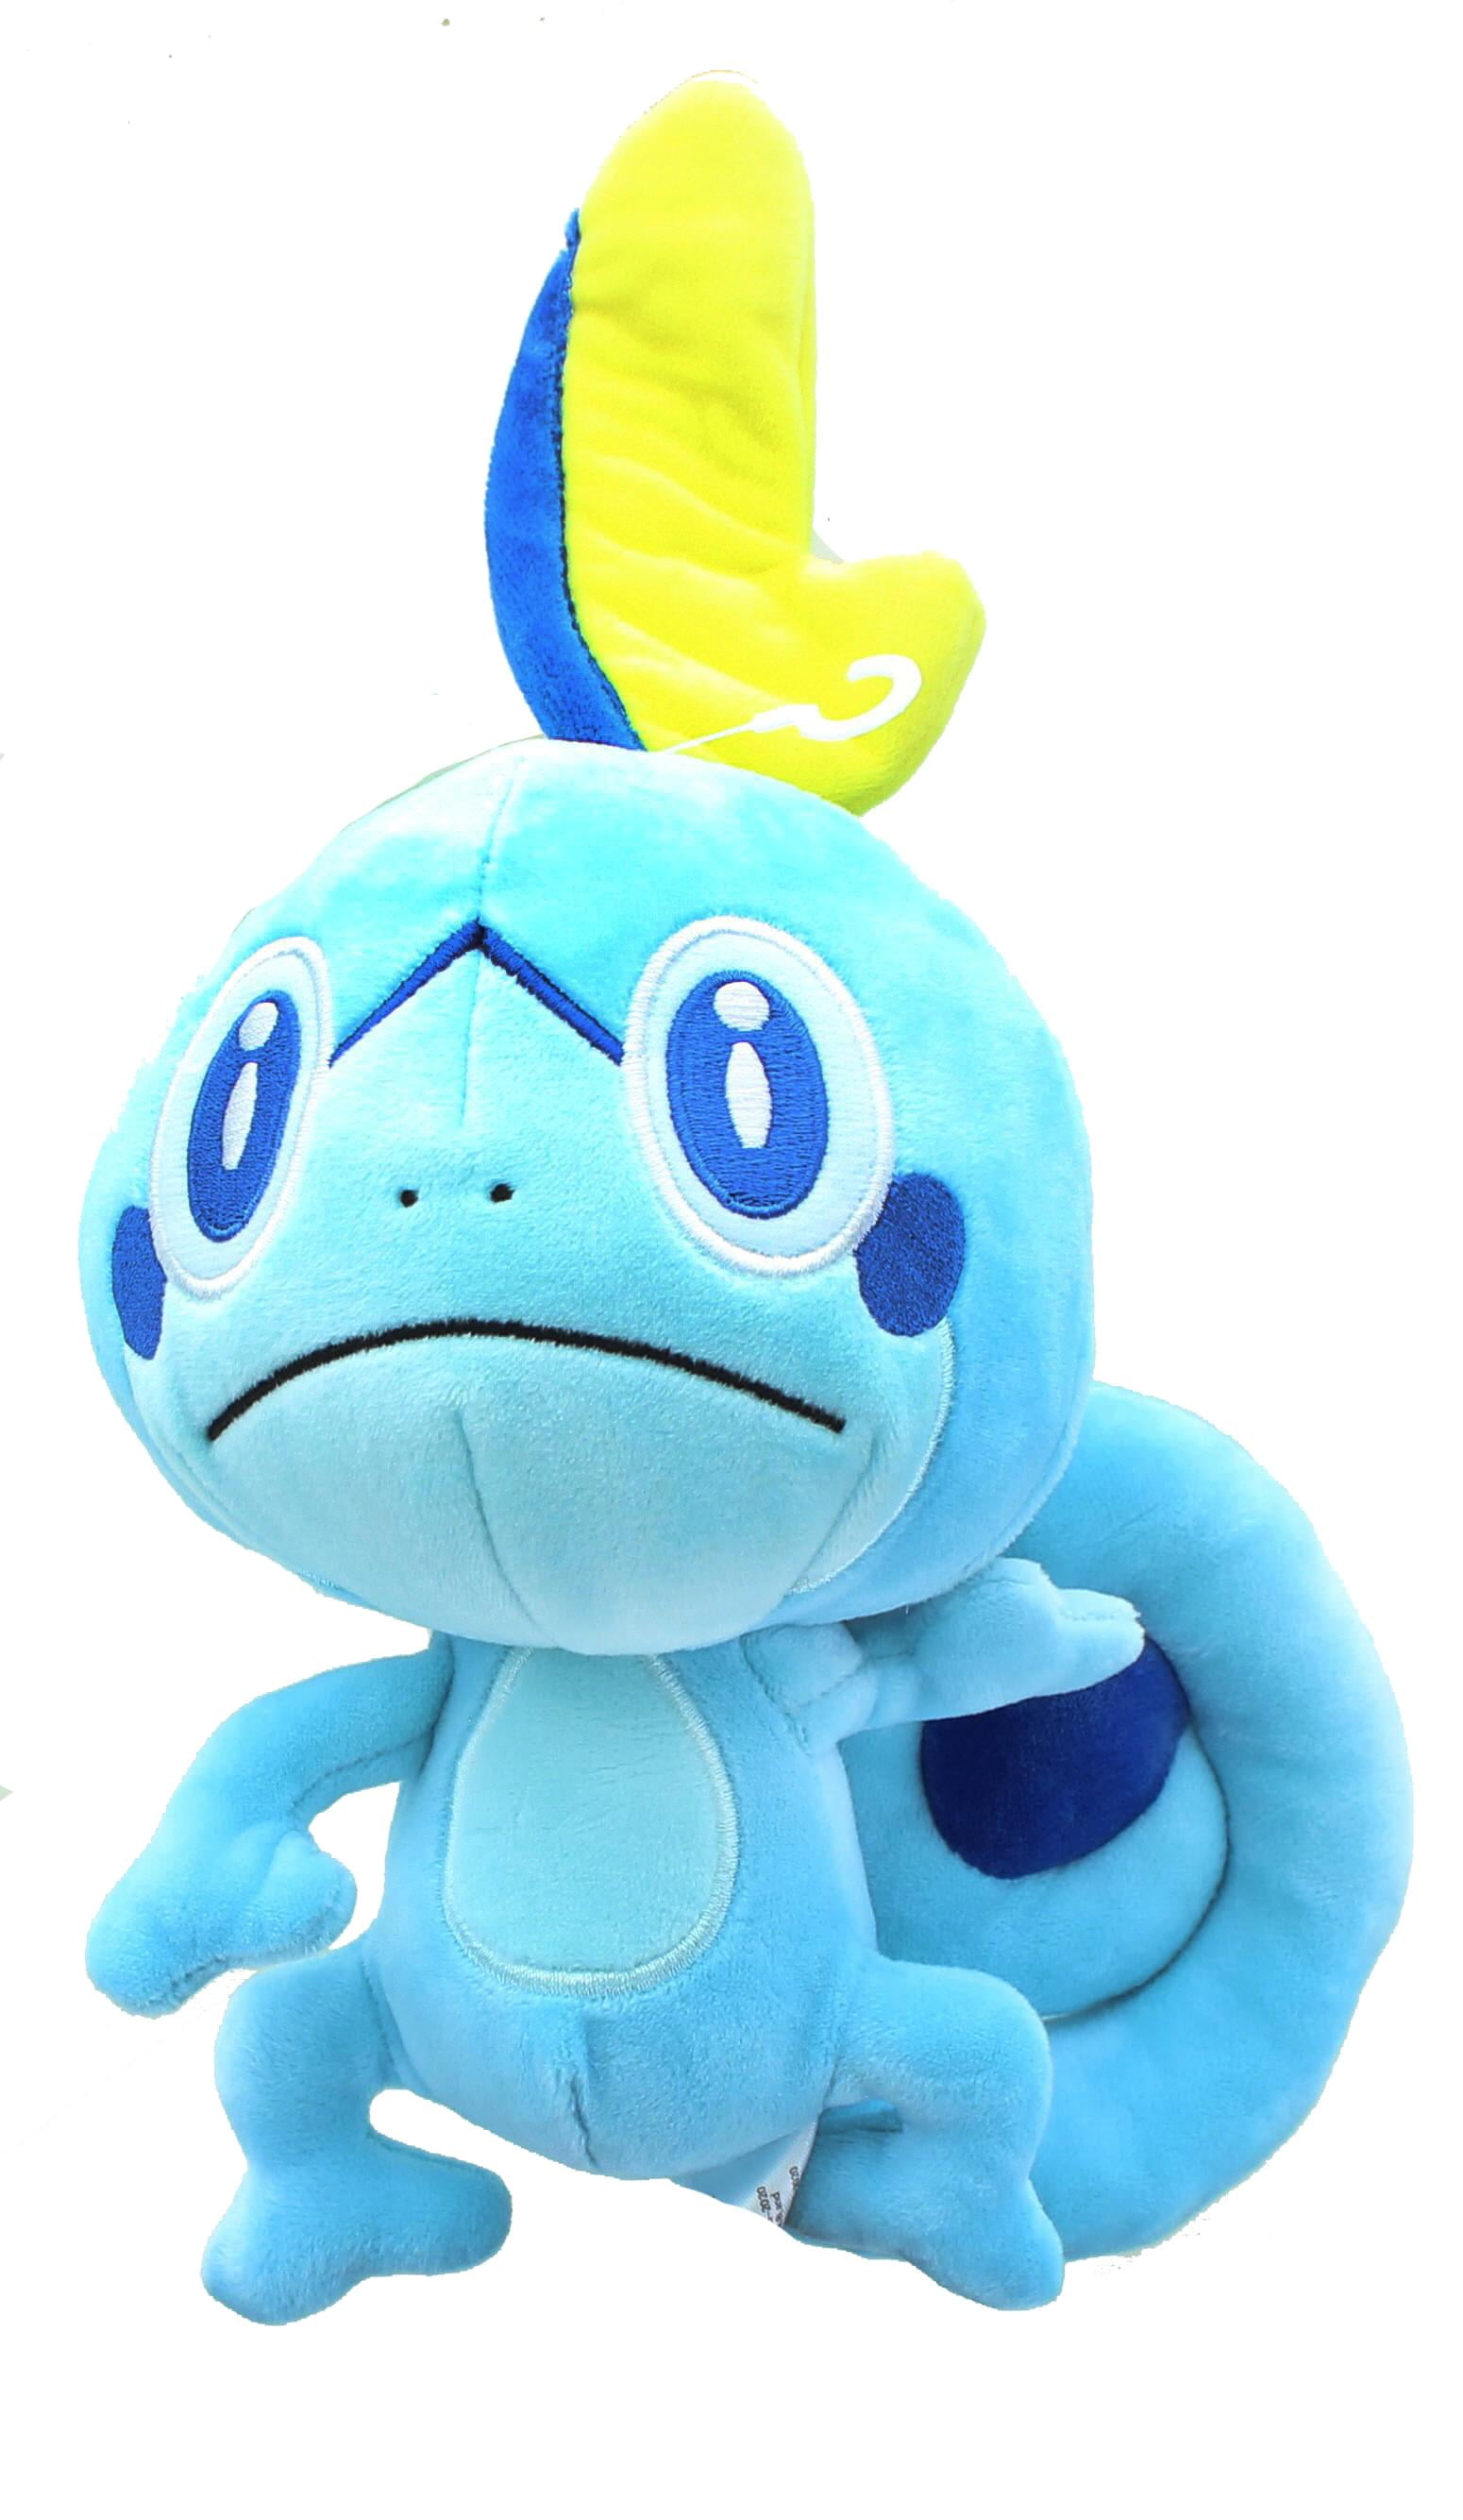 Official Pokemon Sword and Shield Sobble 8 Inch Plush Soft Toy Teddy 